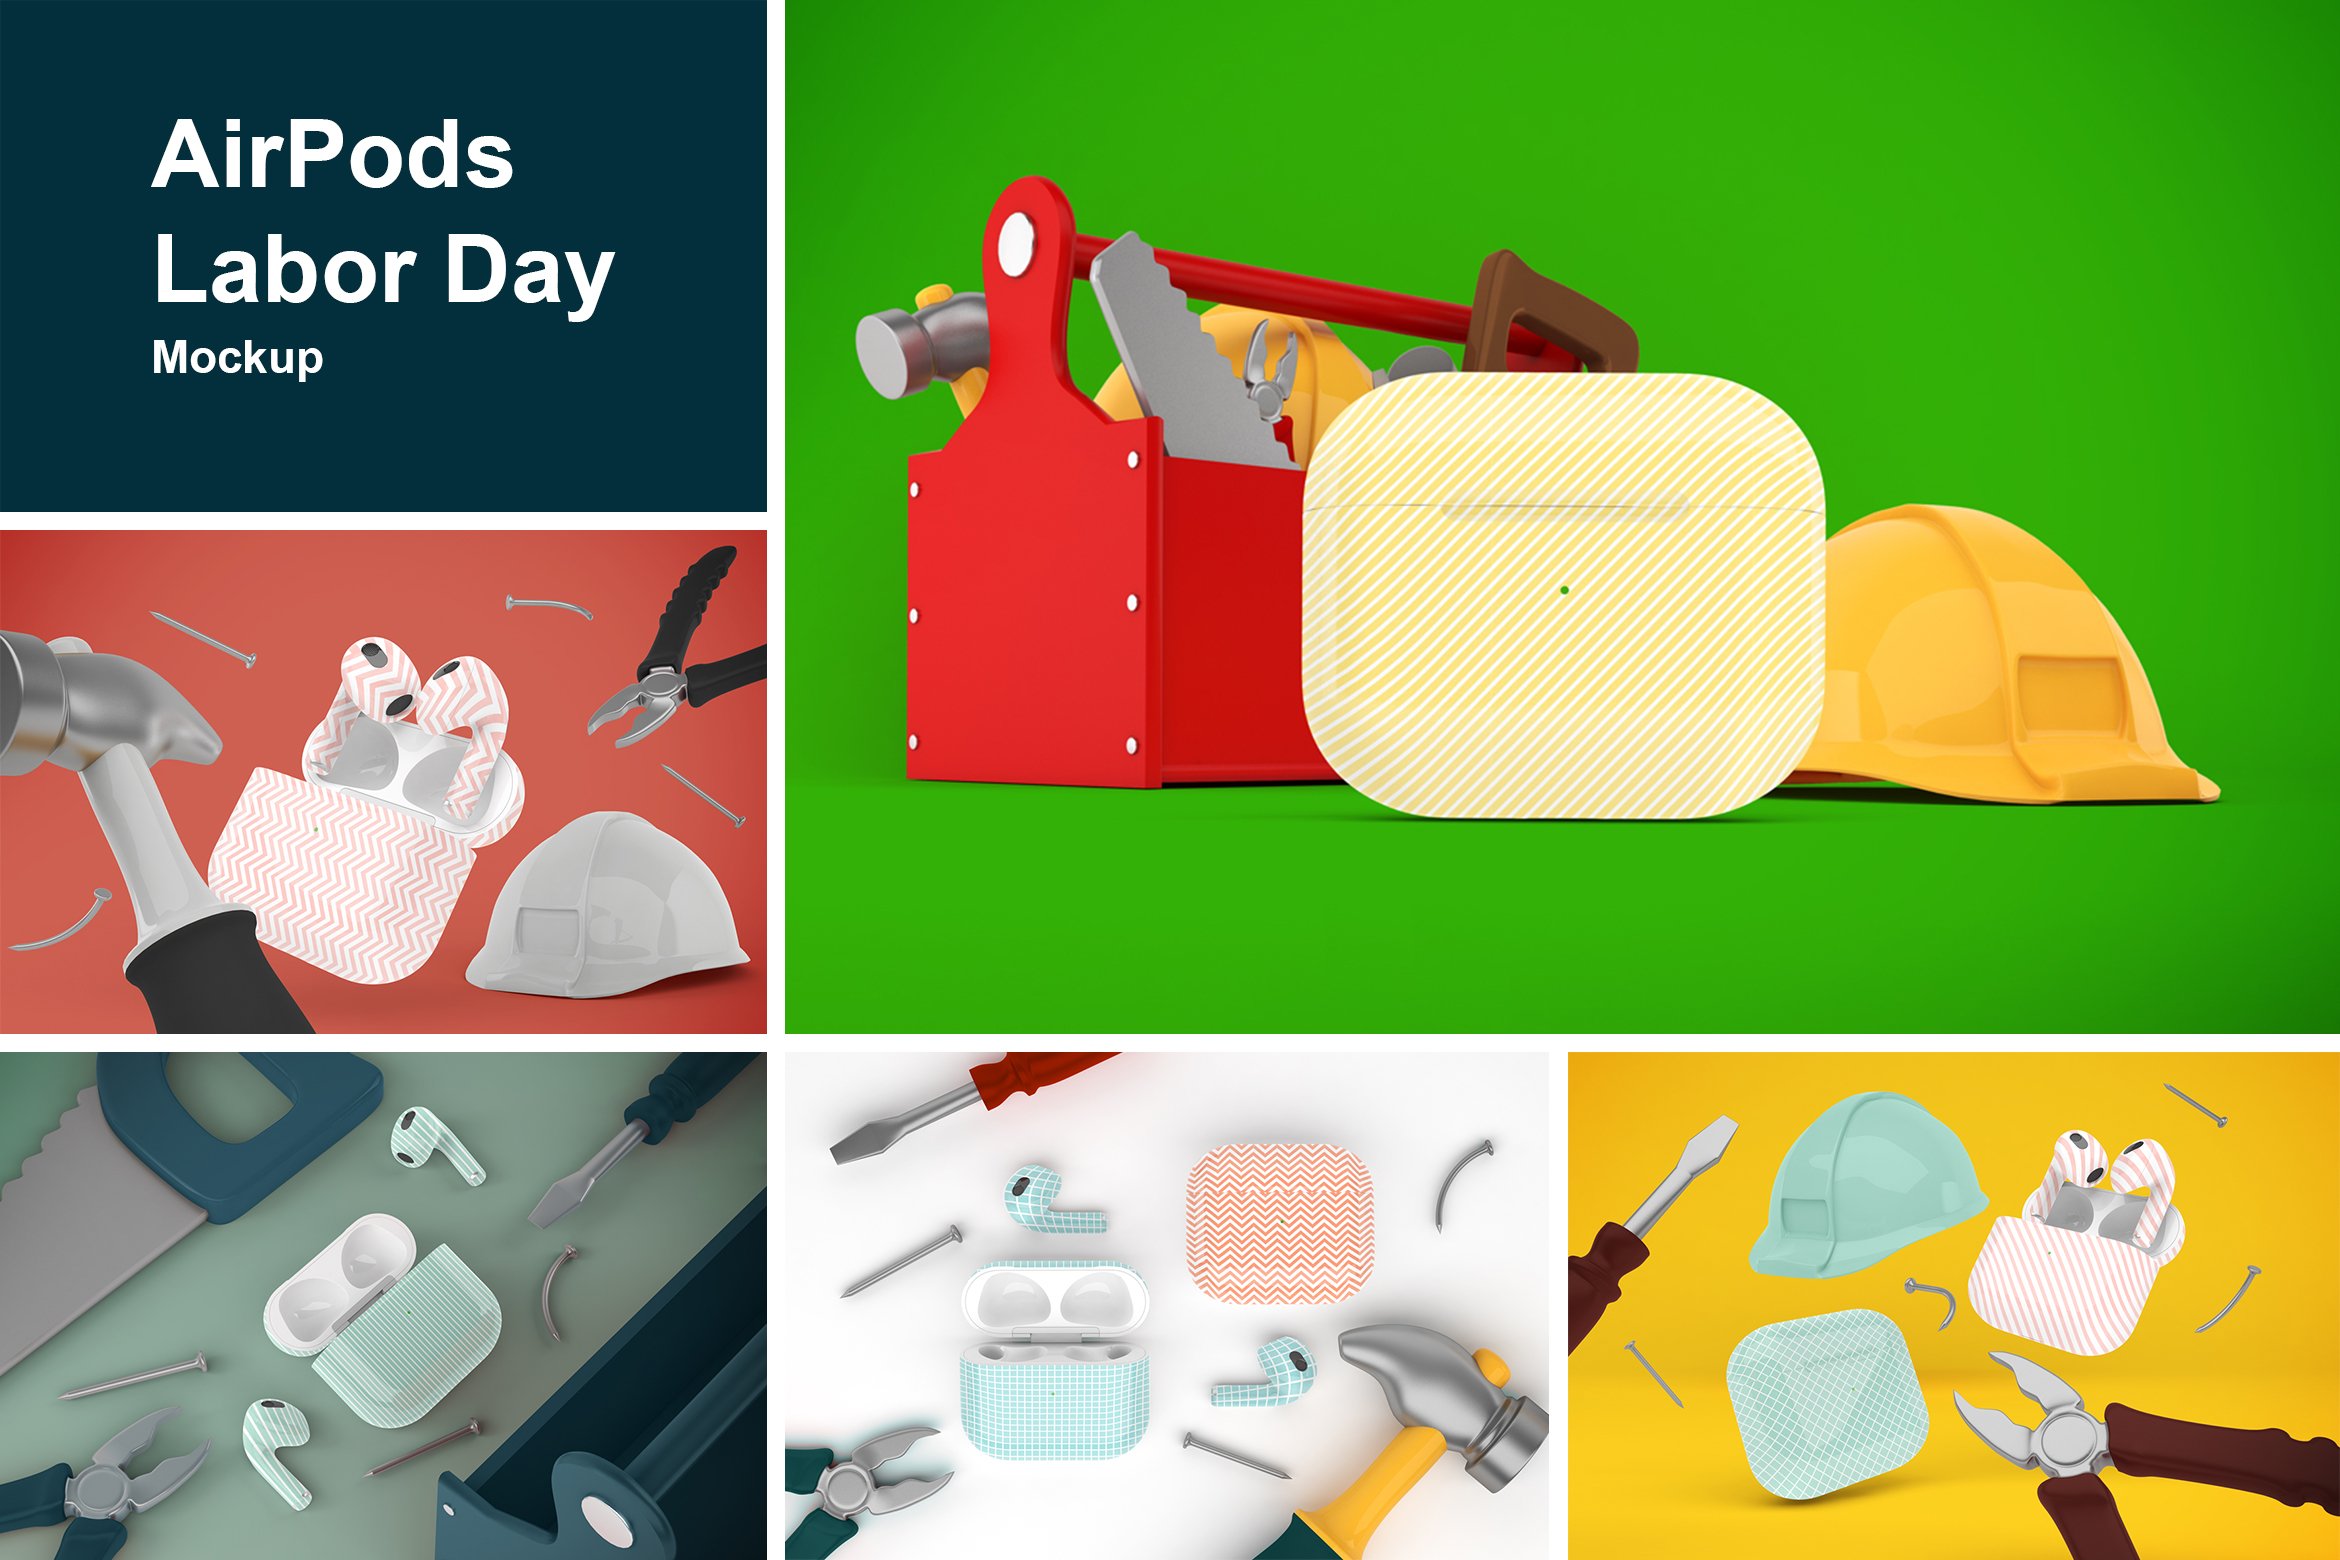 AirPods Labor Day Mockup cover image.